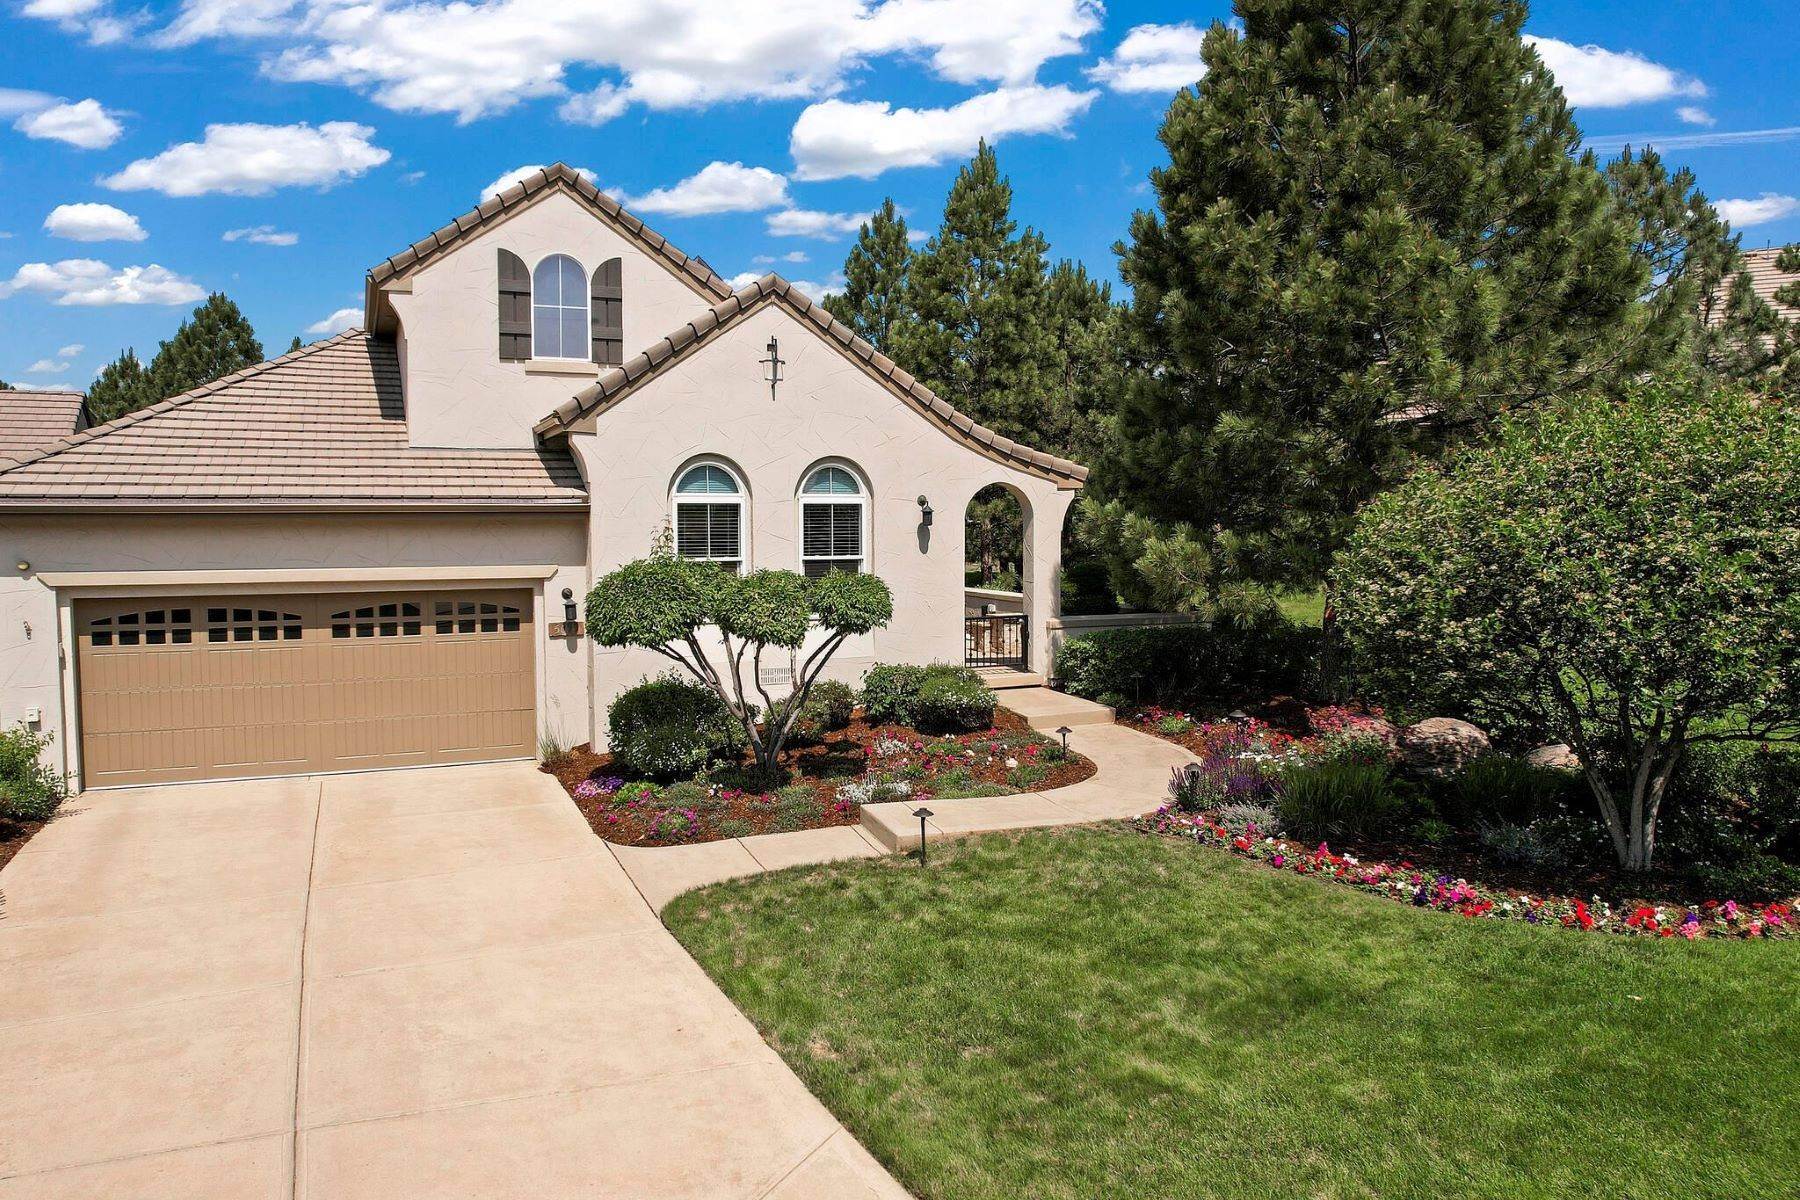 Single Family Homes for Active at Exquisite home nestled among towering pine trees and blooming flowers 5059 Vermillion Drive Castle Rock, Colorado 80108 United States